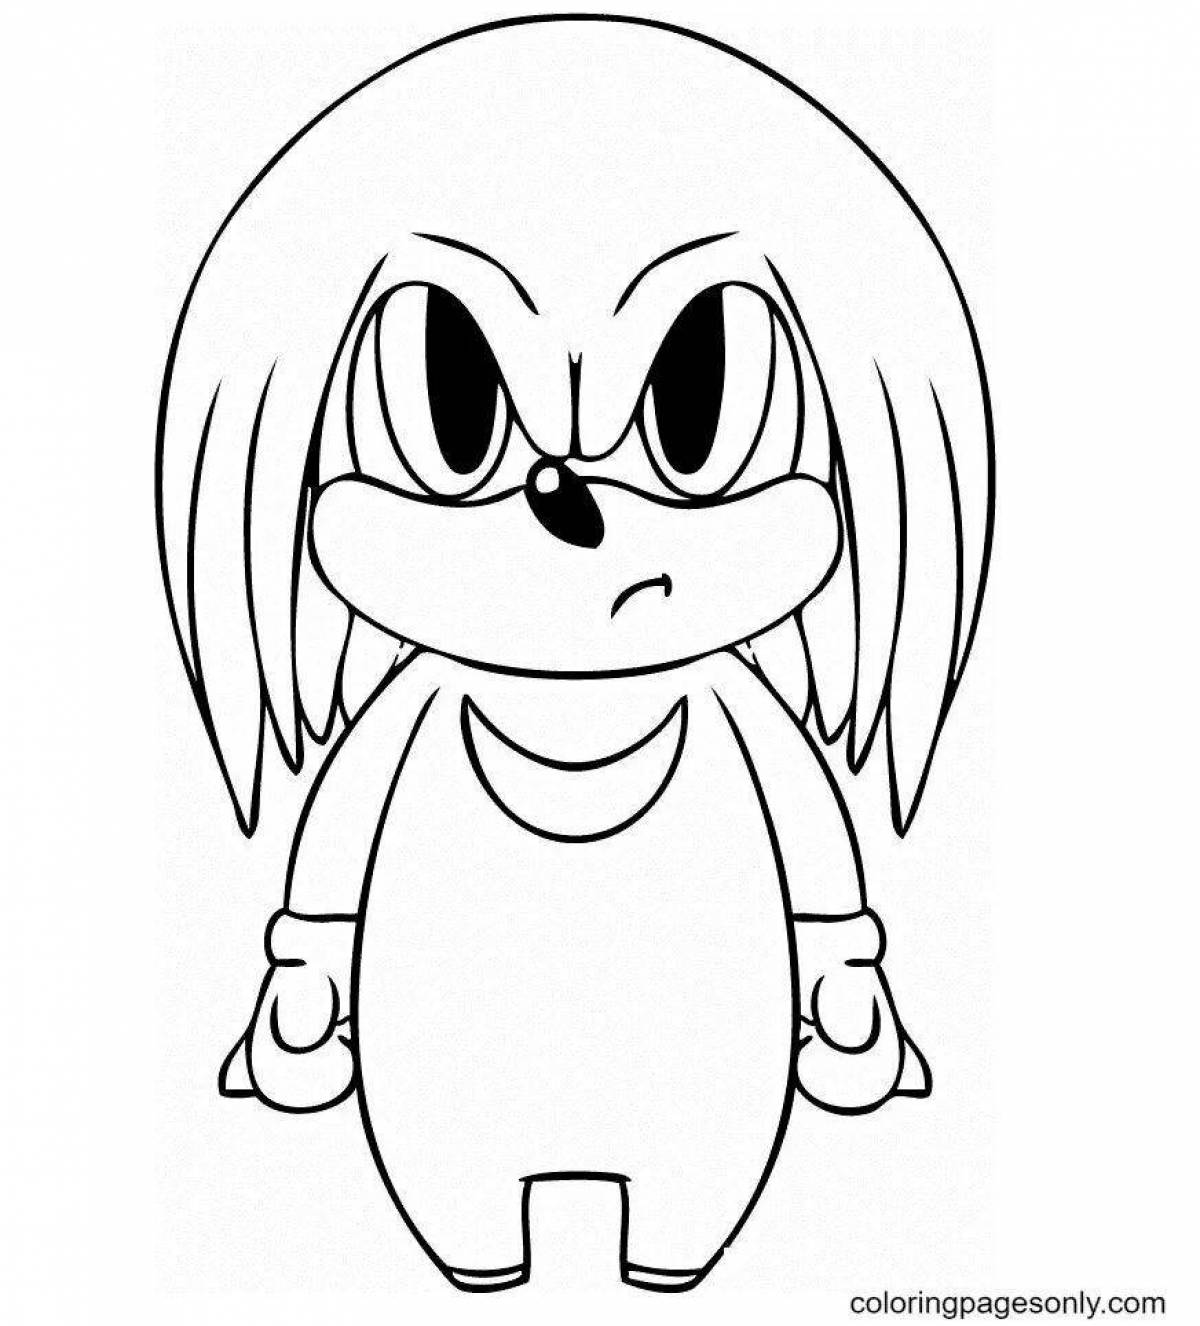 Coloring book smart echidna knuckles